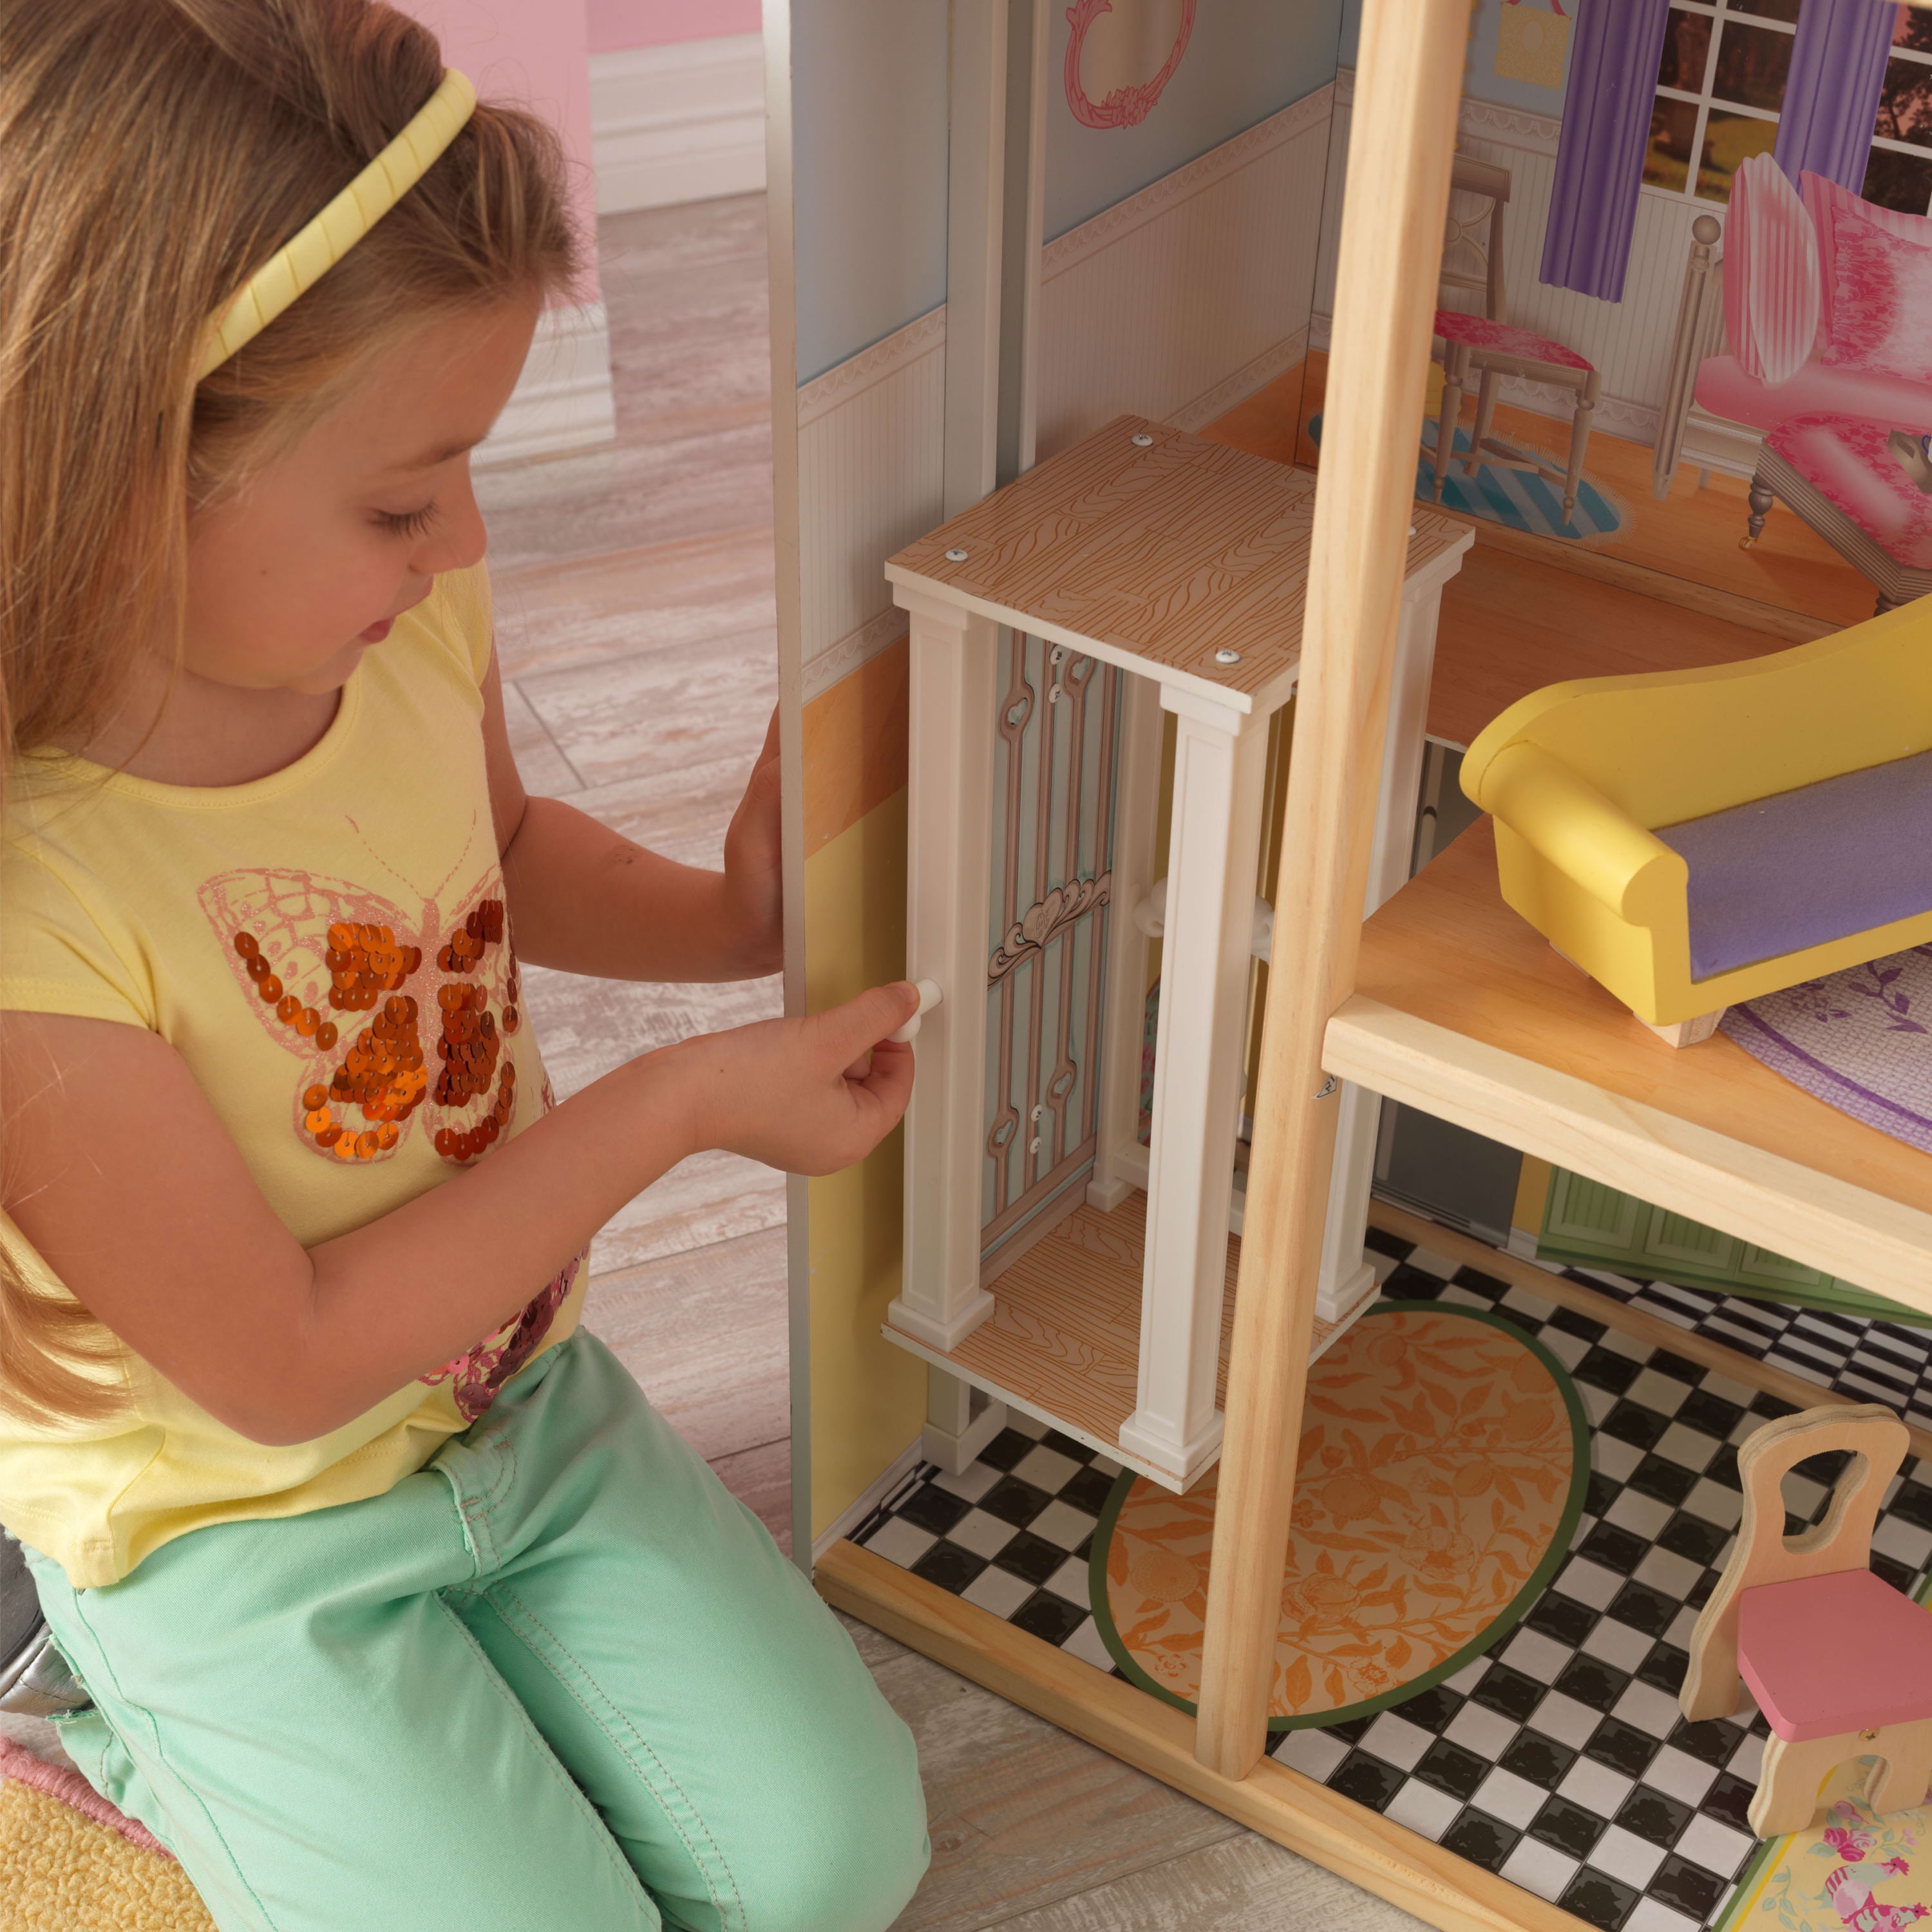 Elevator, 4 Feet Stairs and 10 Accessories Almost Tall Dollhouse, Wooden Kaylee KidKraft with